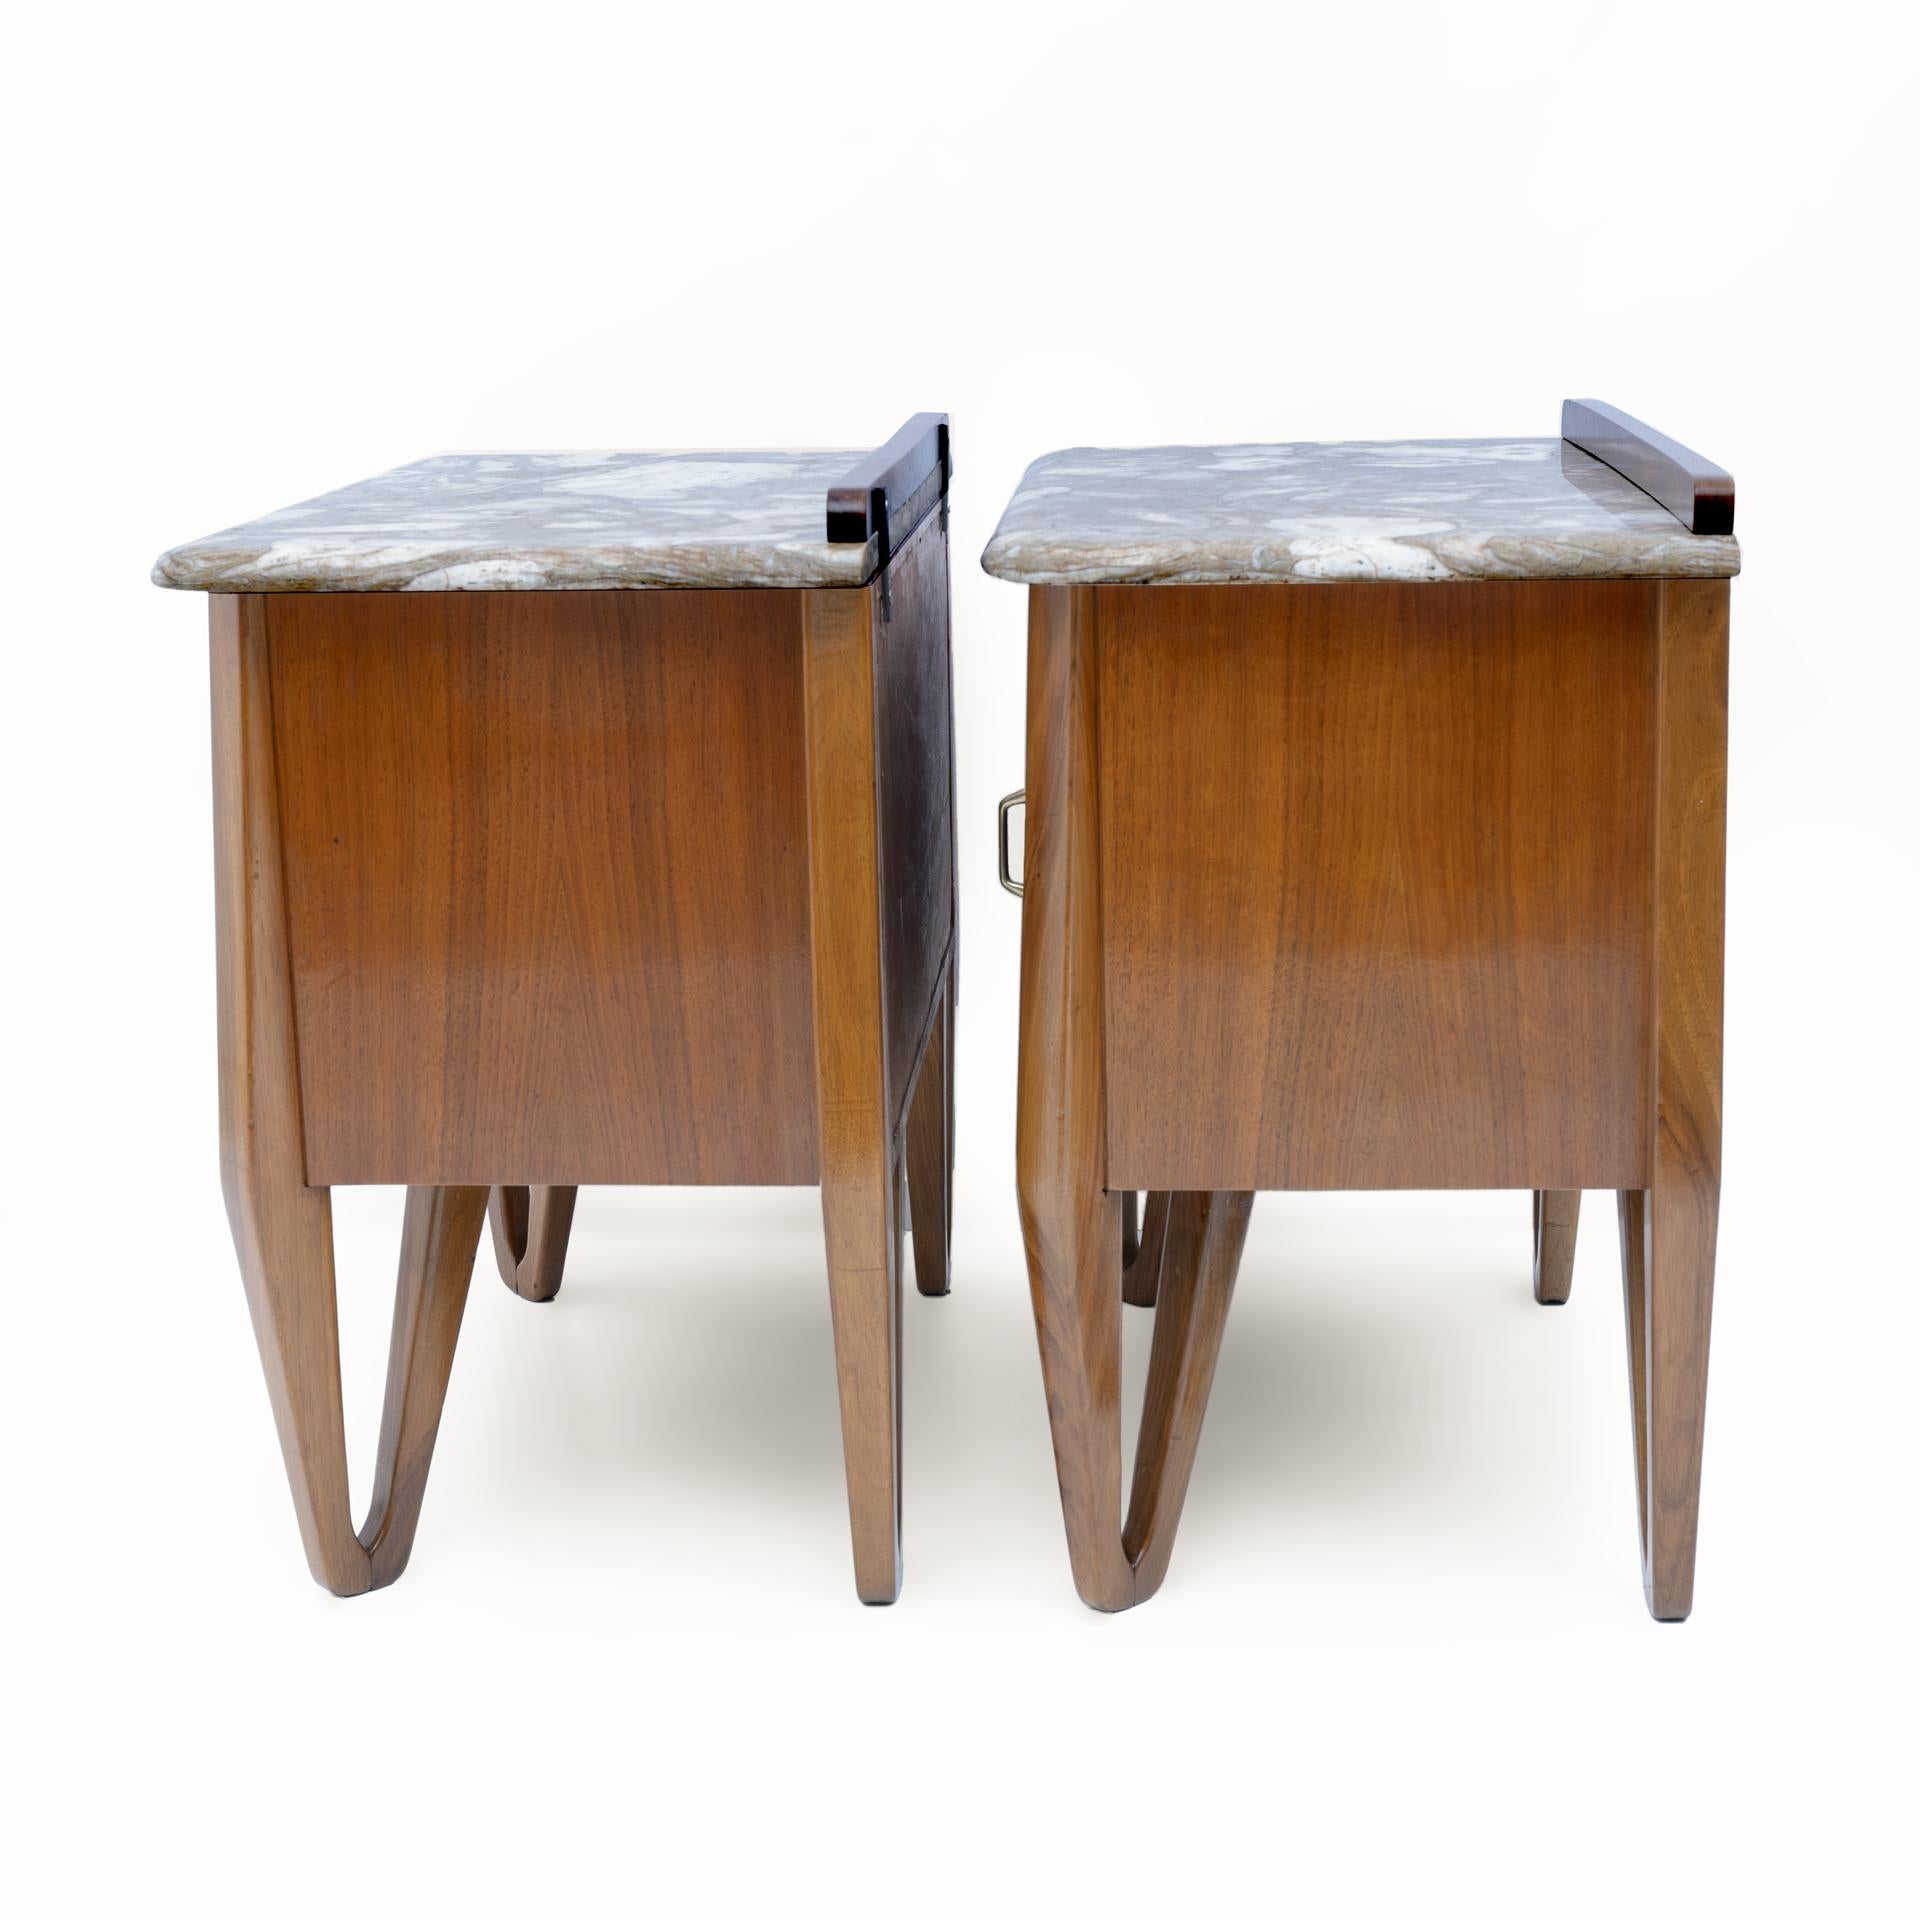 Pair of Mid-Century Modern Italian Walnut and Marble Nightstands, 1950s For Sale 2